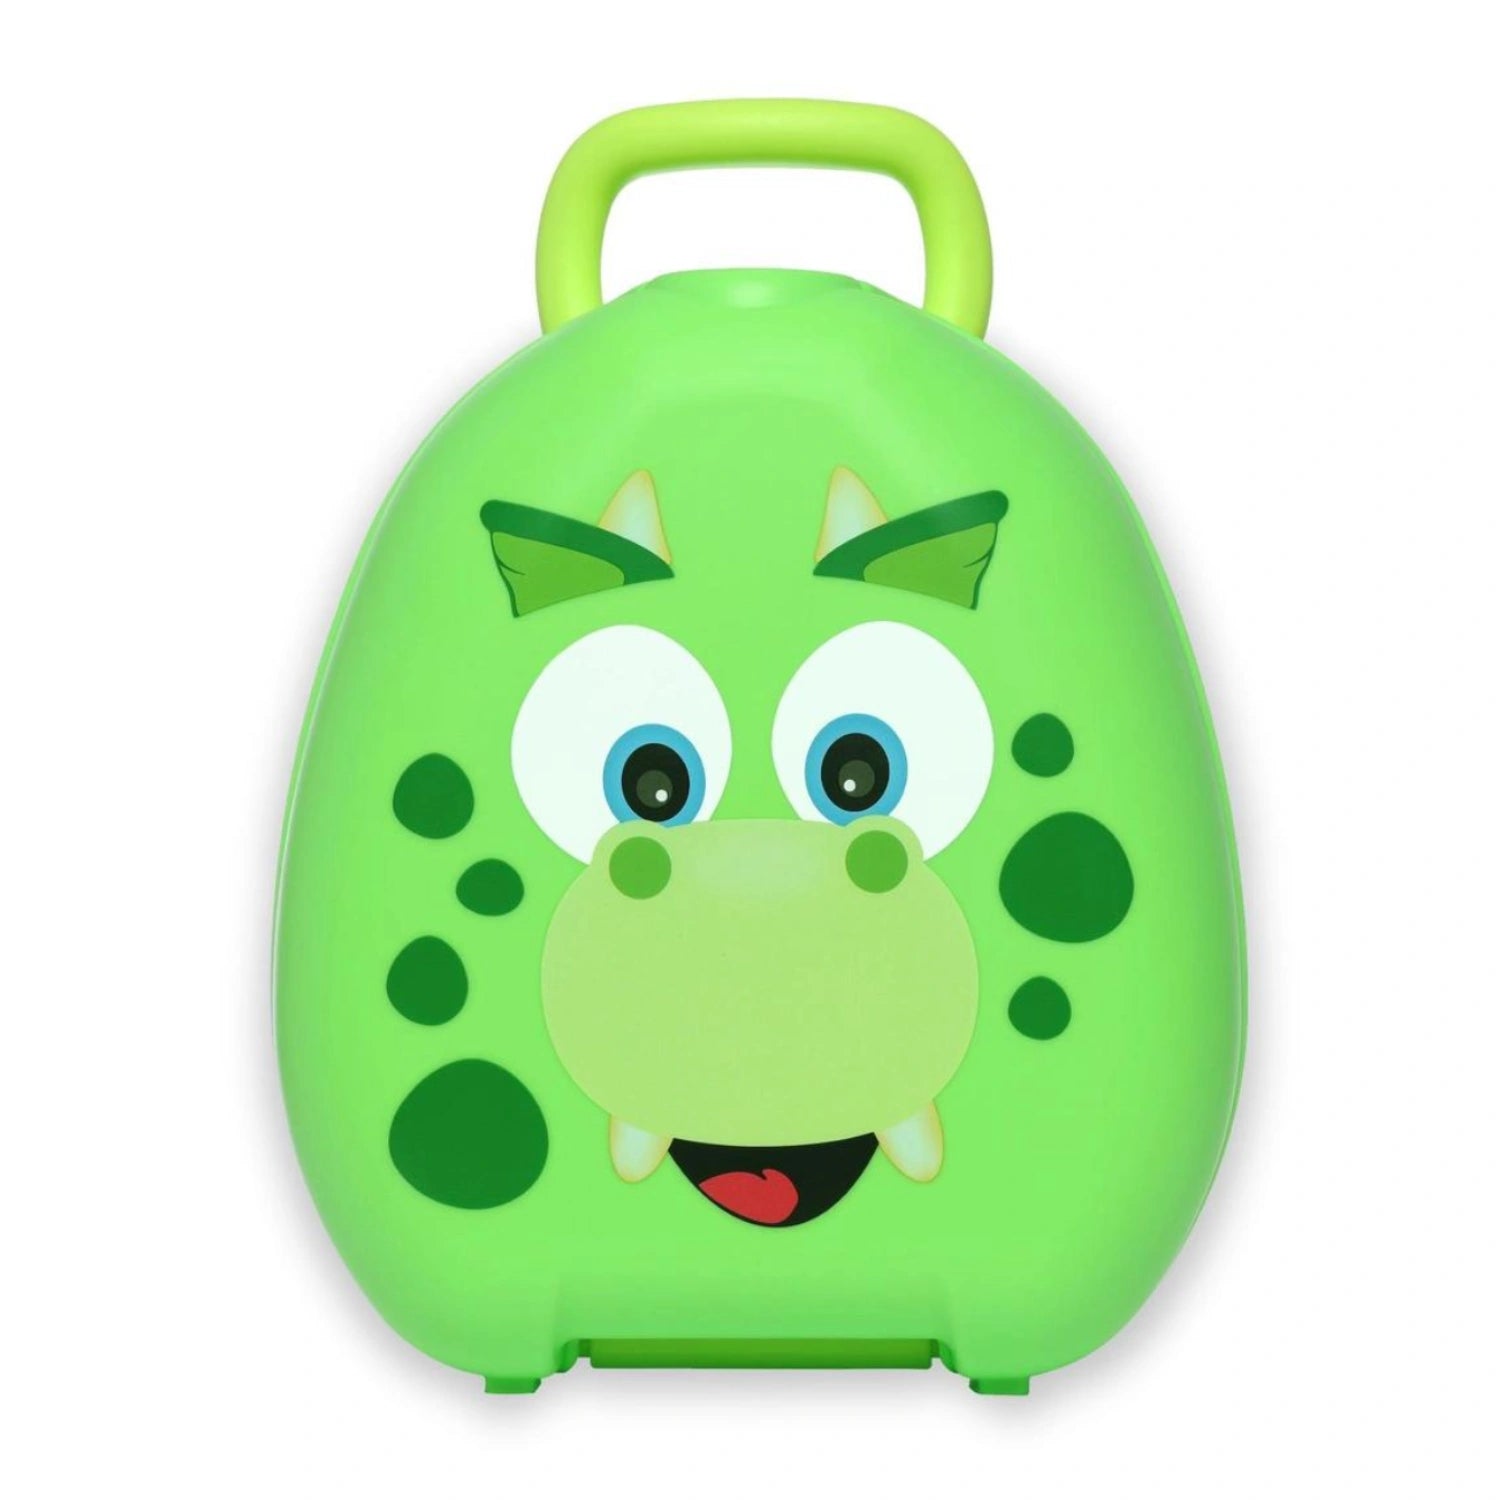 An image of Buy Portable Travel Potty from My Carry Potty Dinosaur